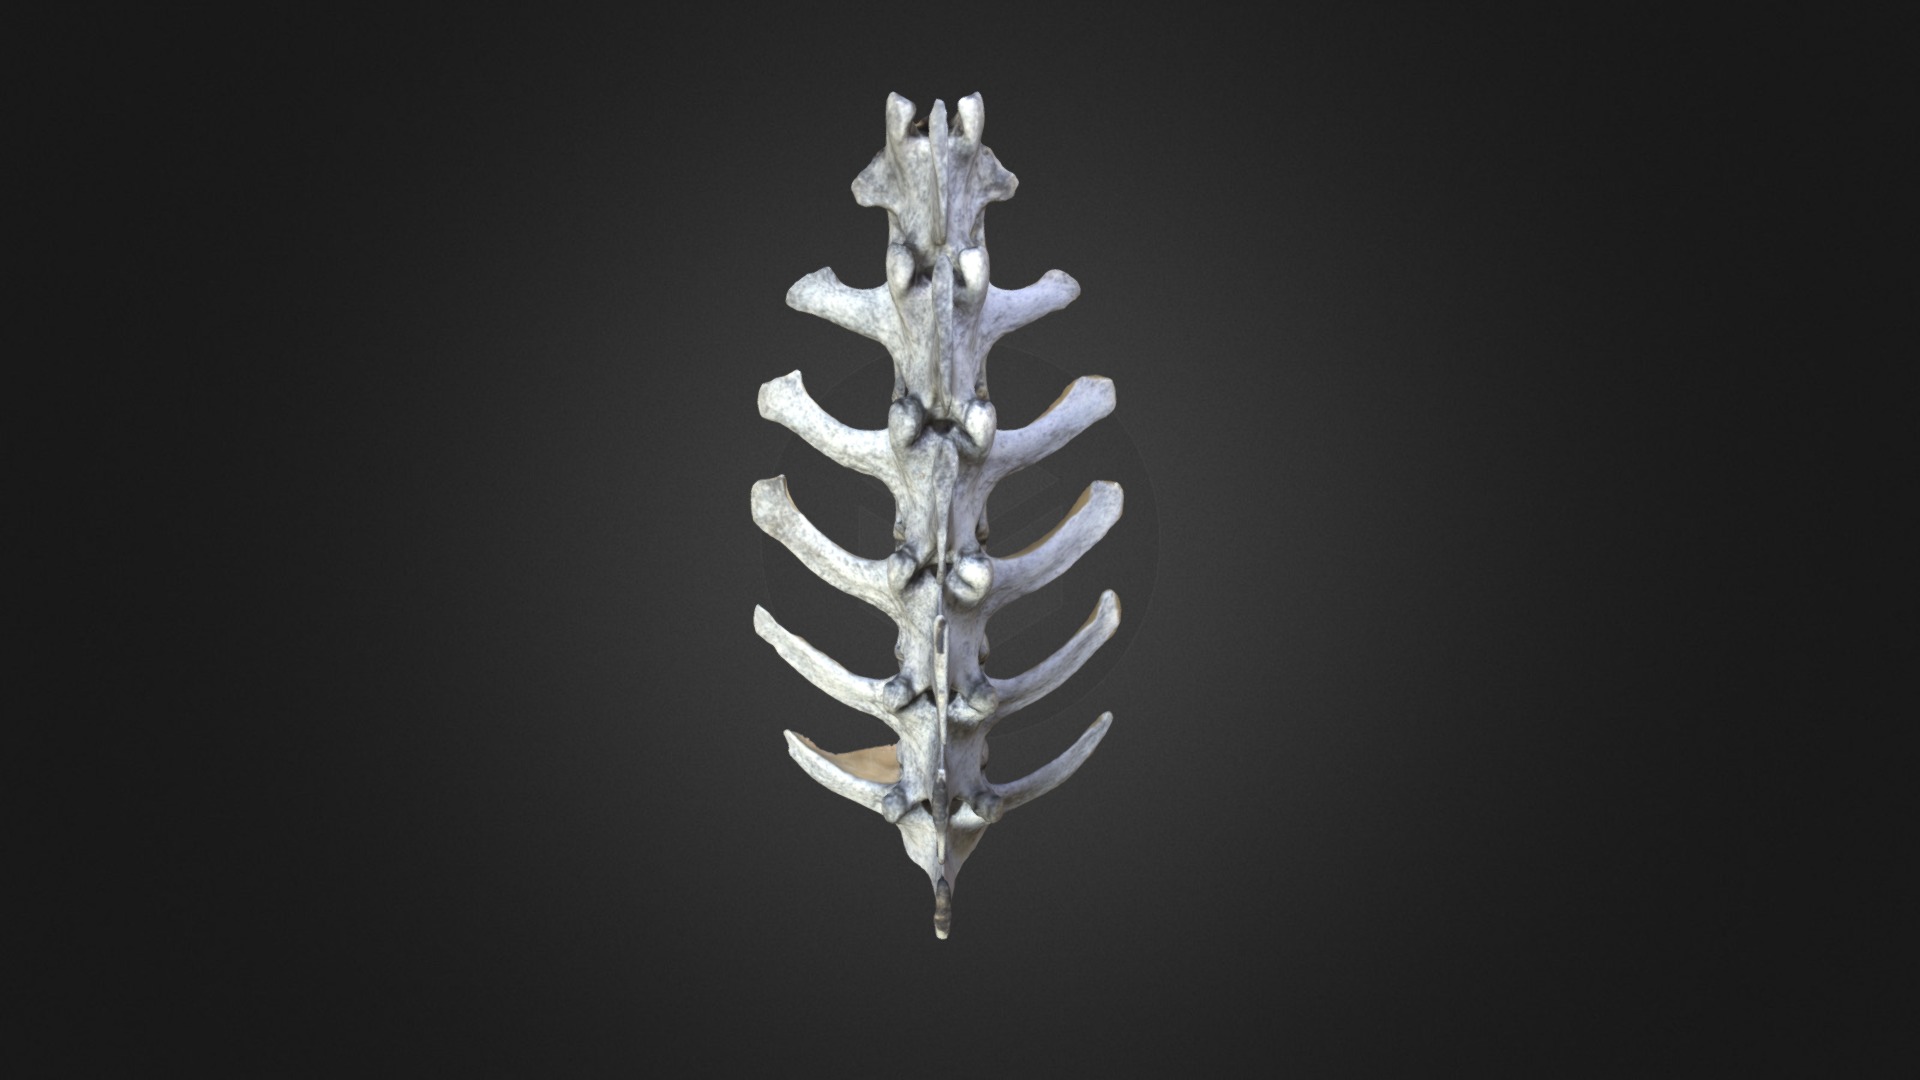 3D model Vertebrae w/ Canon Rebel XT - This is a 3D model of the Vertebrae w/ Canon Rebel XT. The 3D model is about a close-up of a metal sculpture.